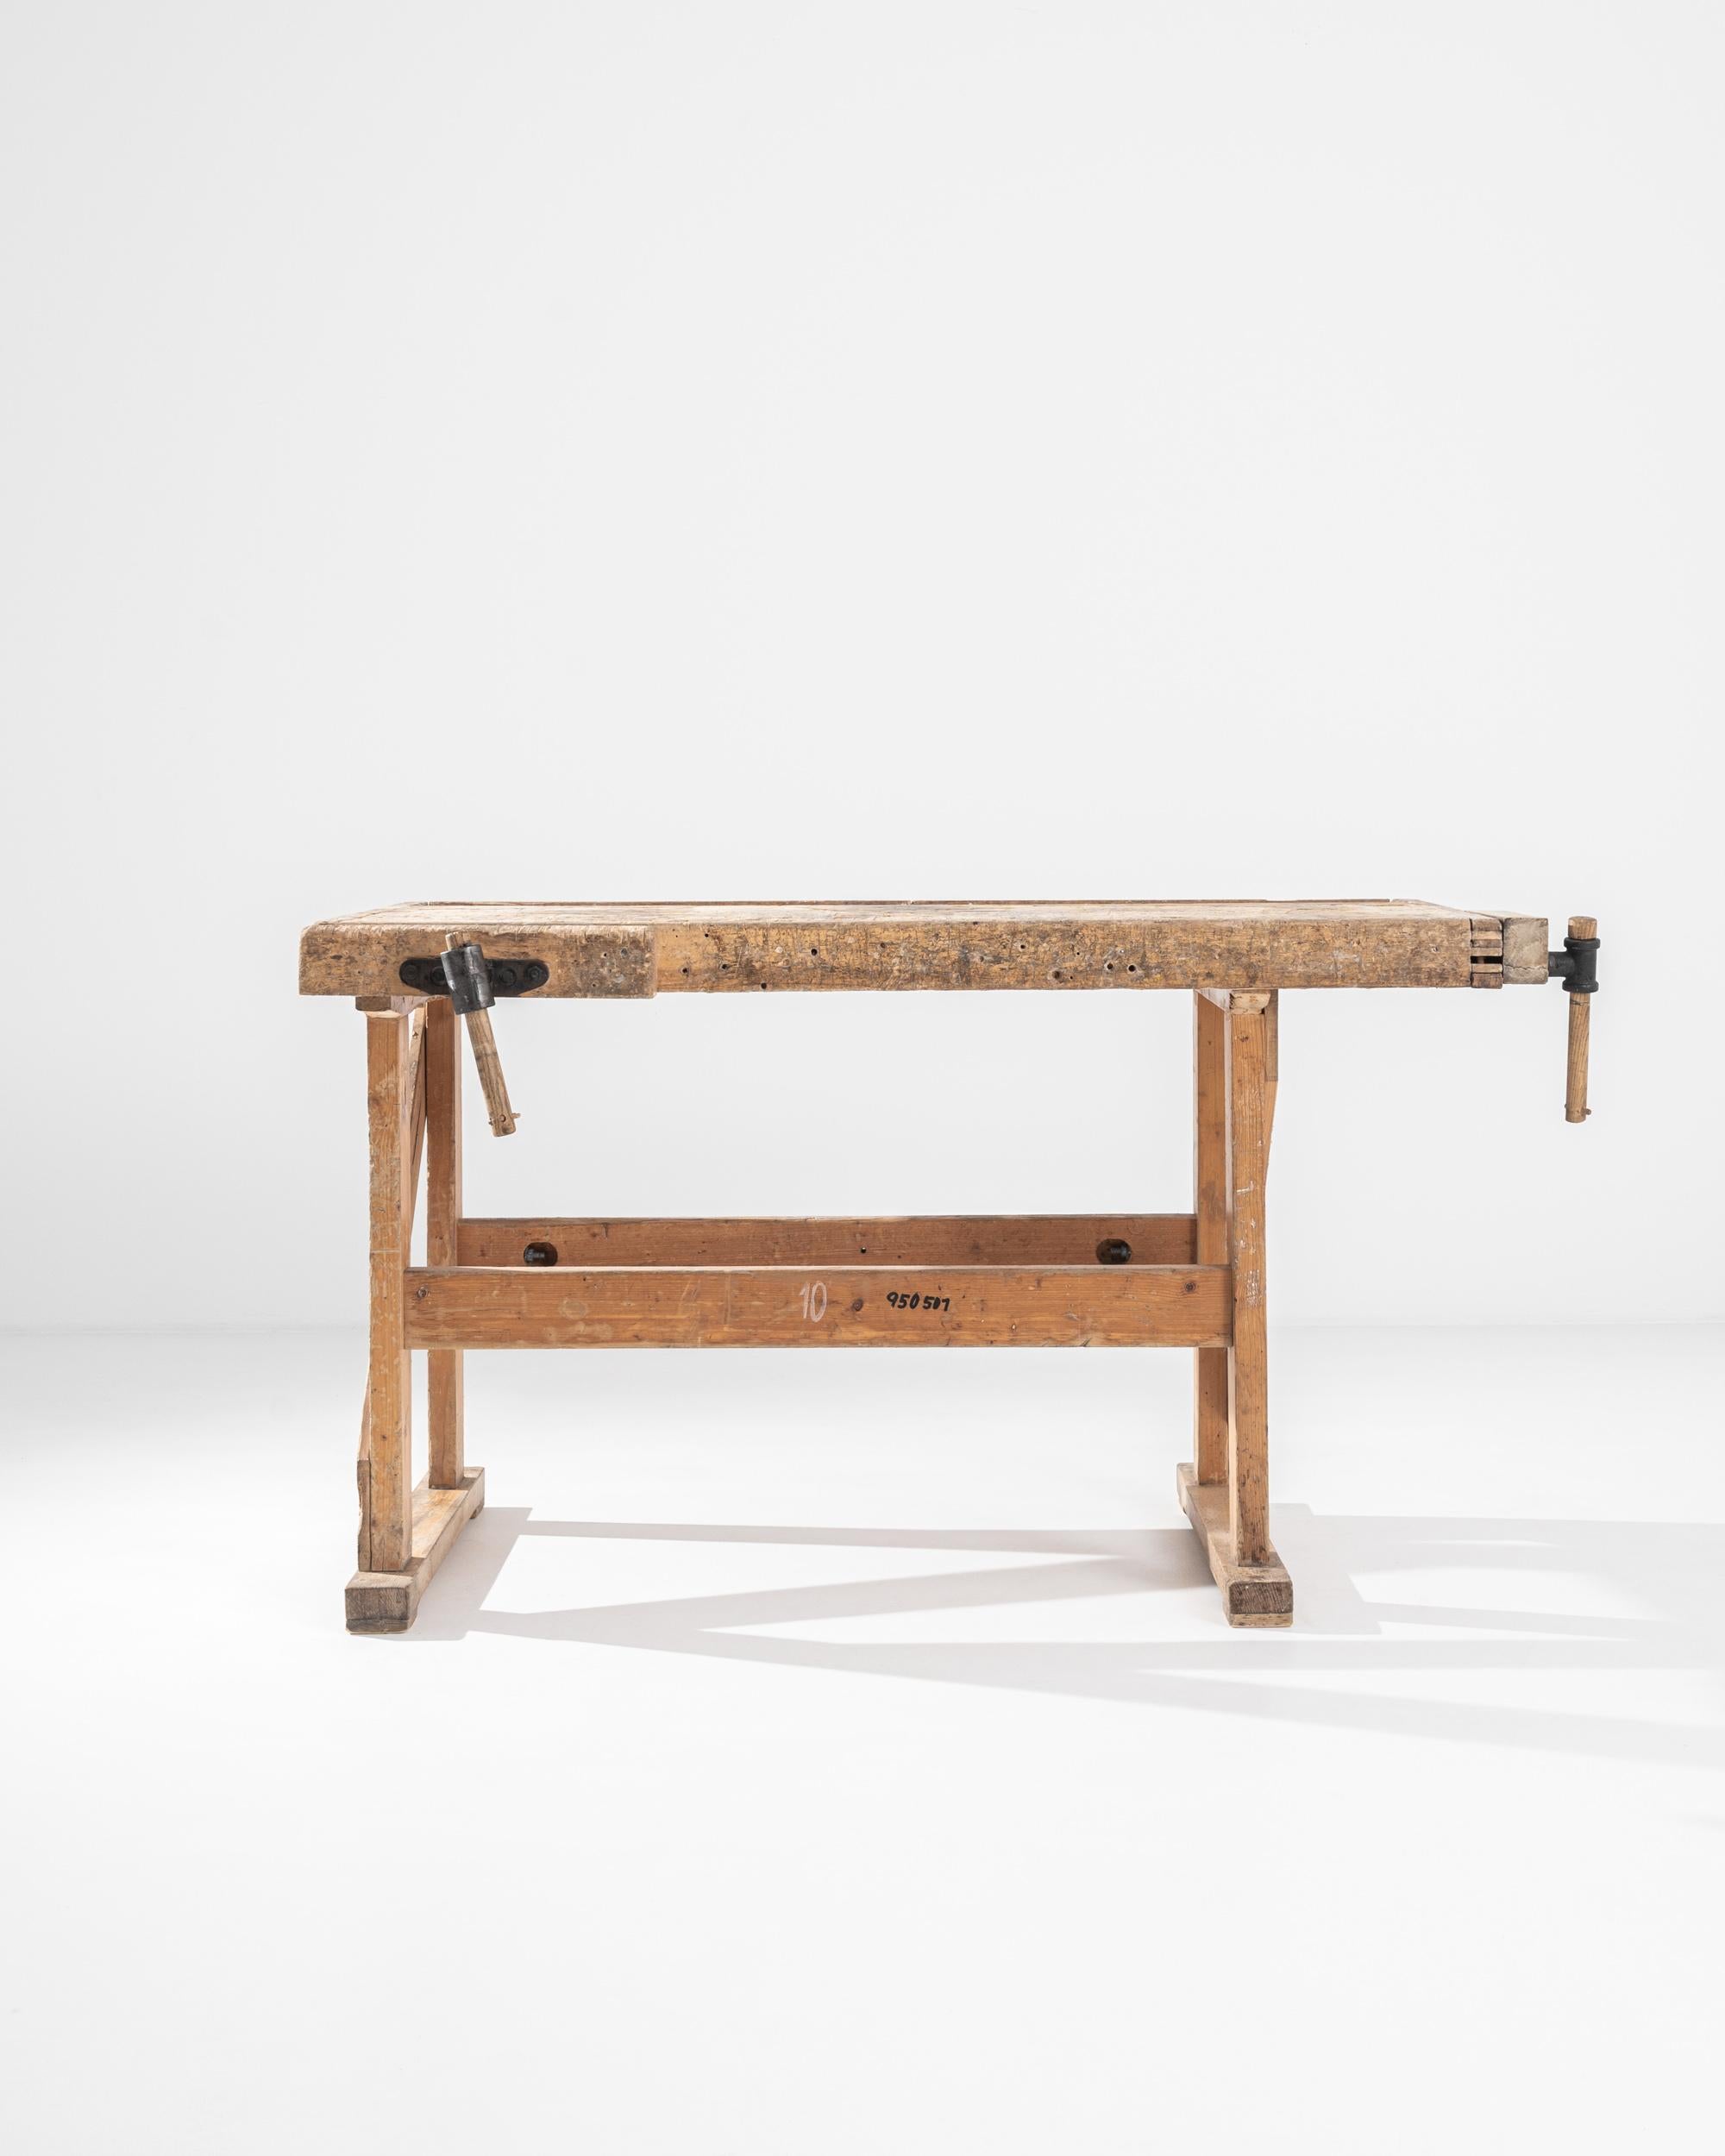 A vintage Central European wooden work table. Constructed from stout wooden beams, crafted with the owner’s livelihood in mind. This ultimate sturdy table’s newest craft is turning function into style. Worn and loved, the details in its construction